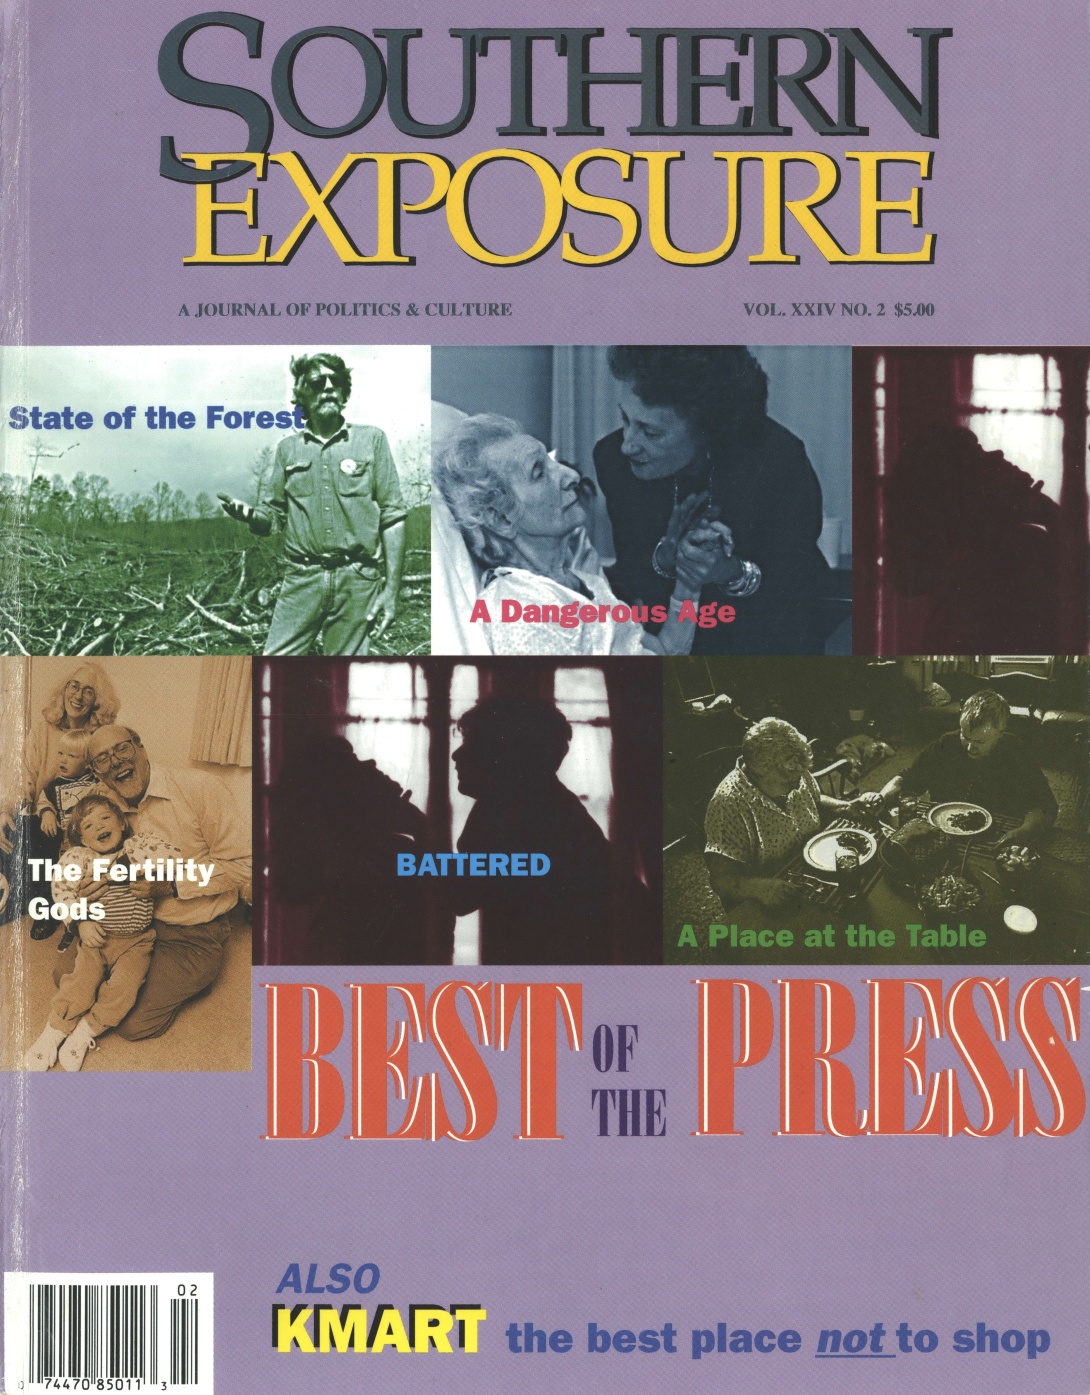 Magazine cover with photos from various newspaper articles against a purple background; text reads Best of the Press